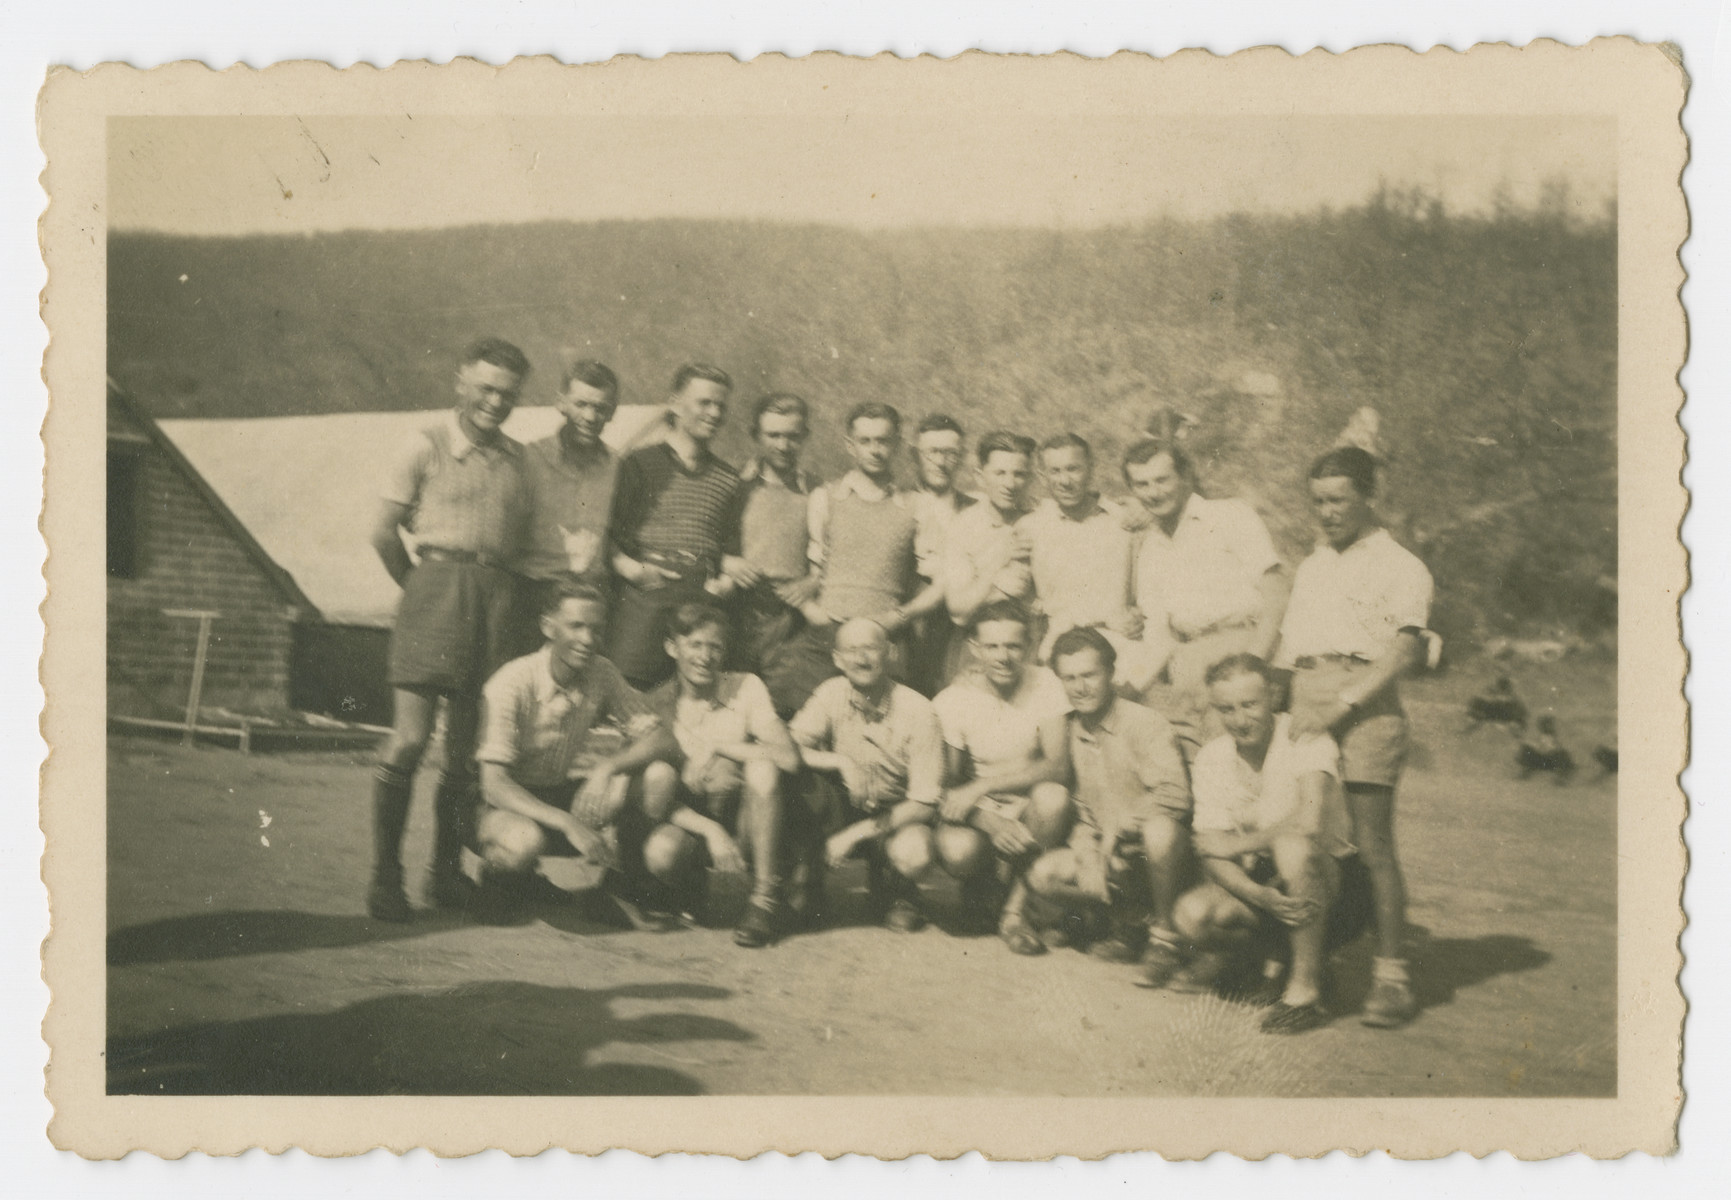 Group portrait of internees in a Bulgarian labor camp.